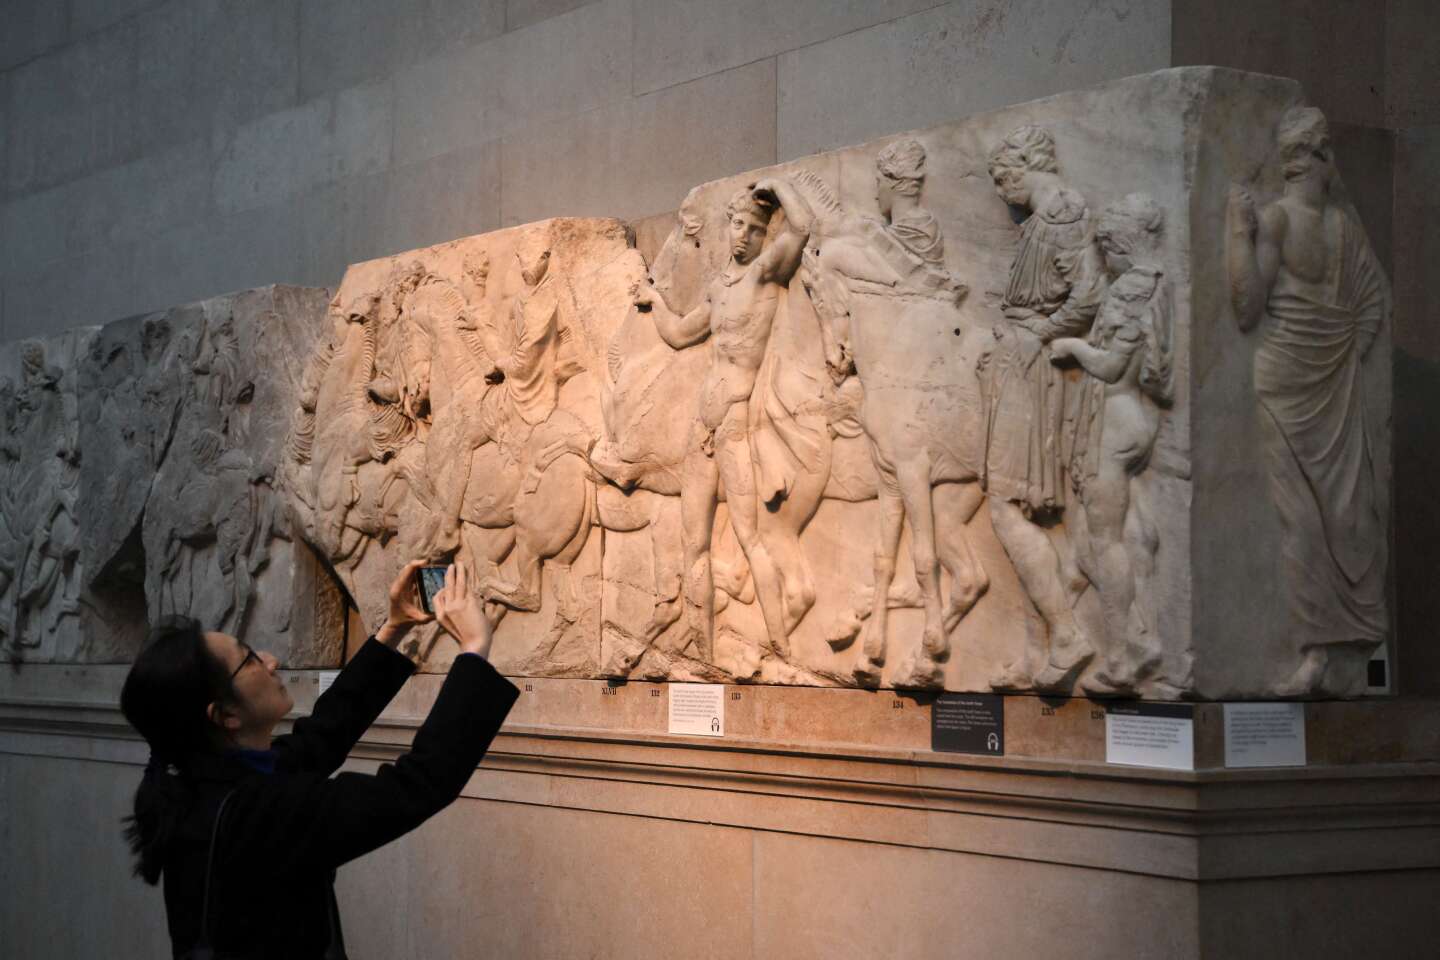 The British government rules out any return of the Parthenon friezes to Greece